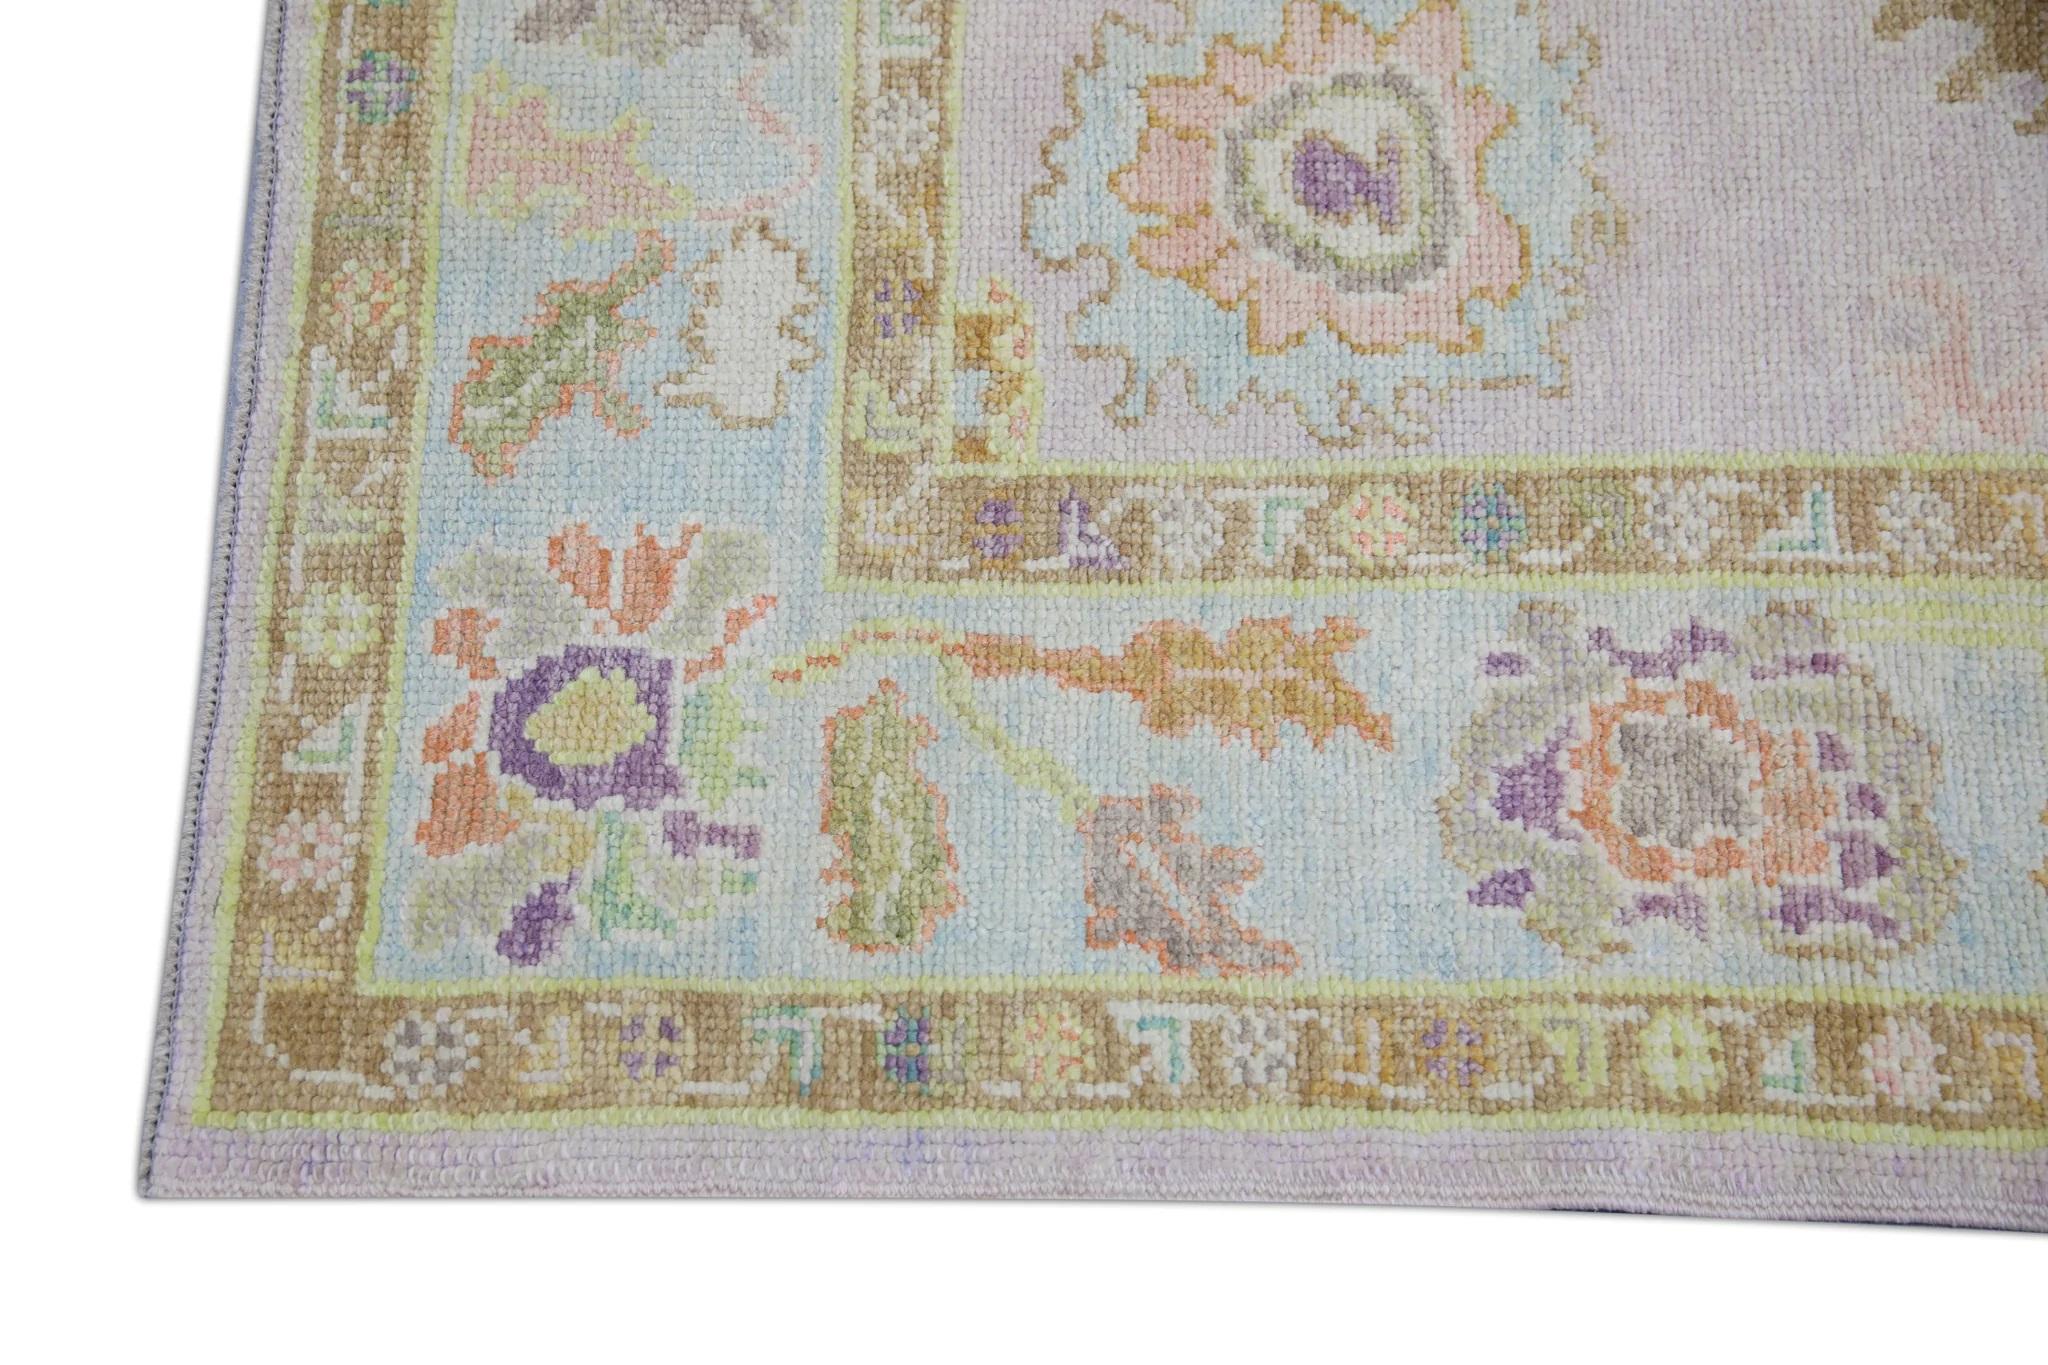 Handwoven Wool Turkish Oushak Rug Lilac Field Multicolor Floral Design 4'2 x 5'7 For Sale 1